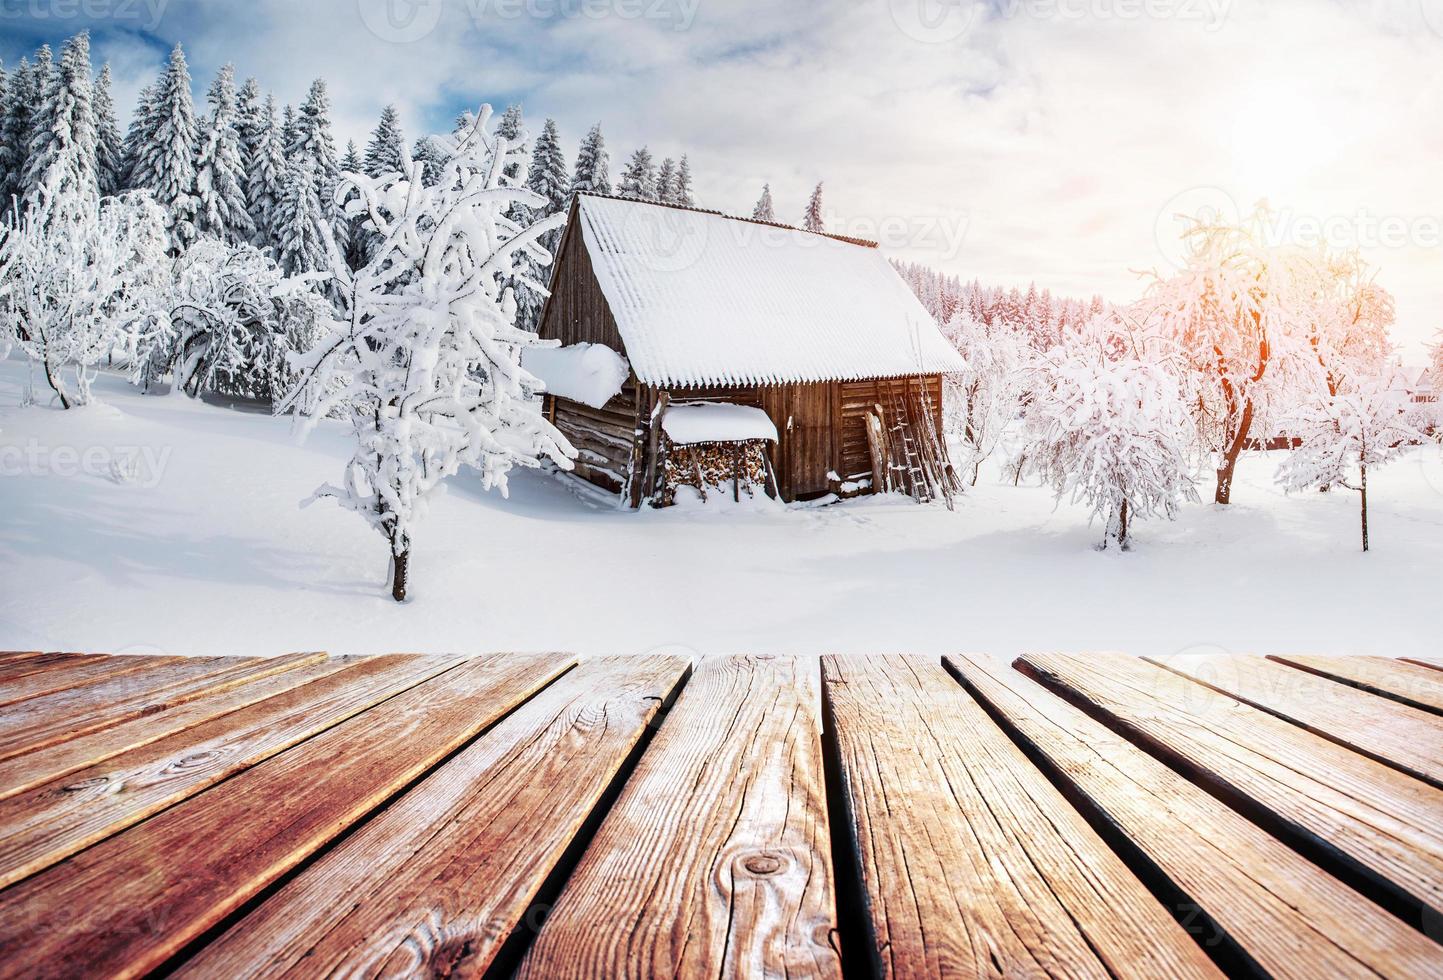 winter mountains landscape with a snowy forest and  wooden hut photo